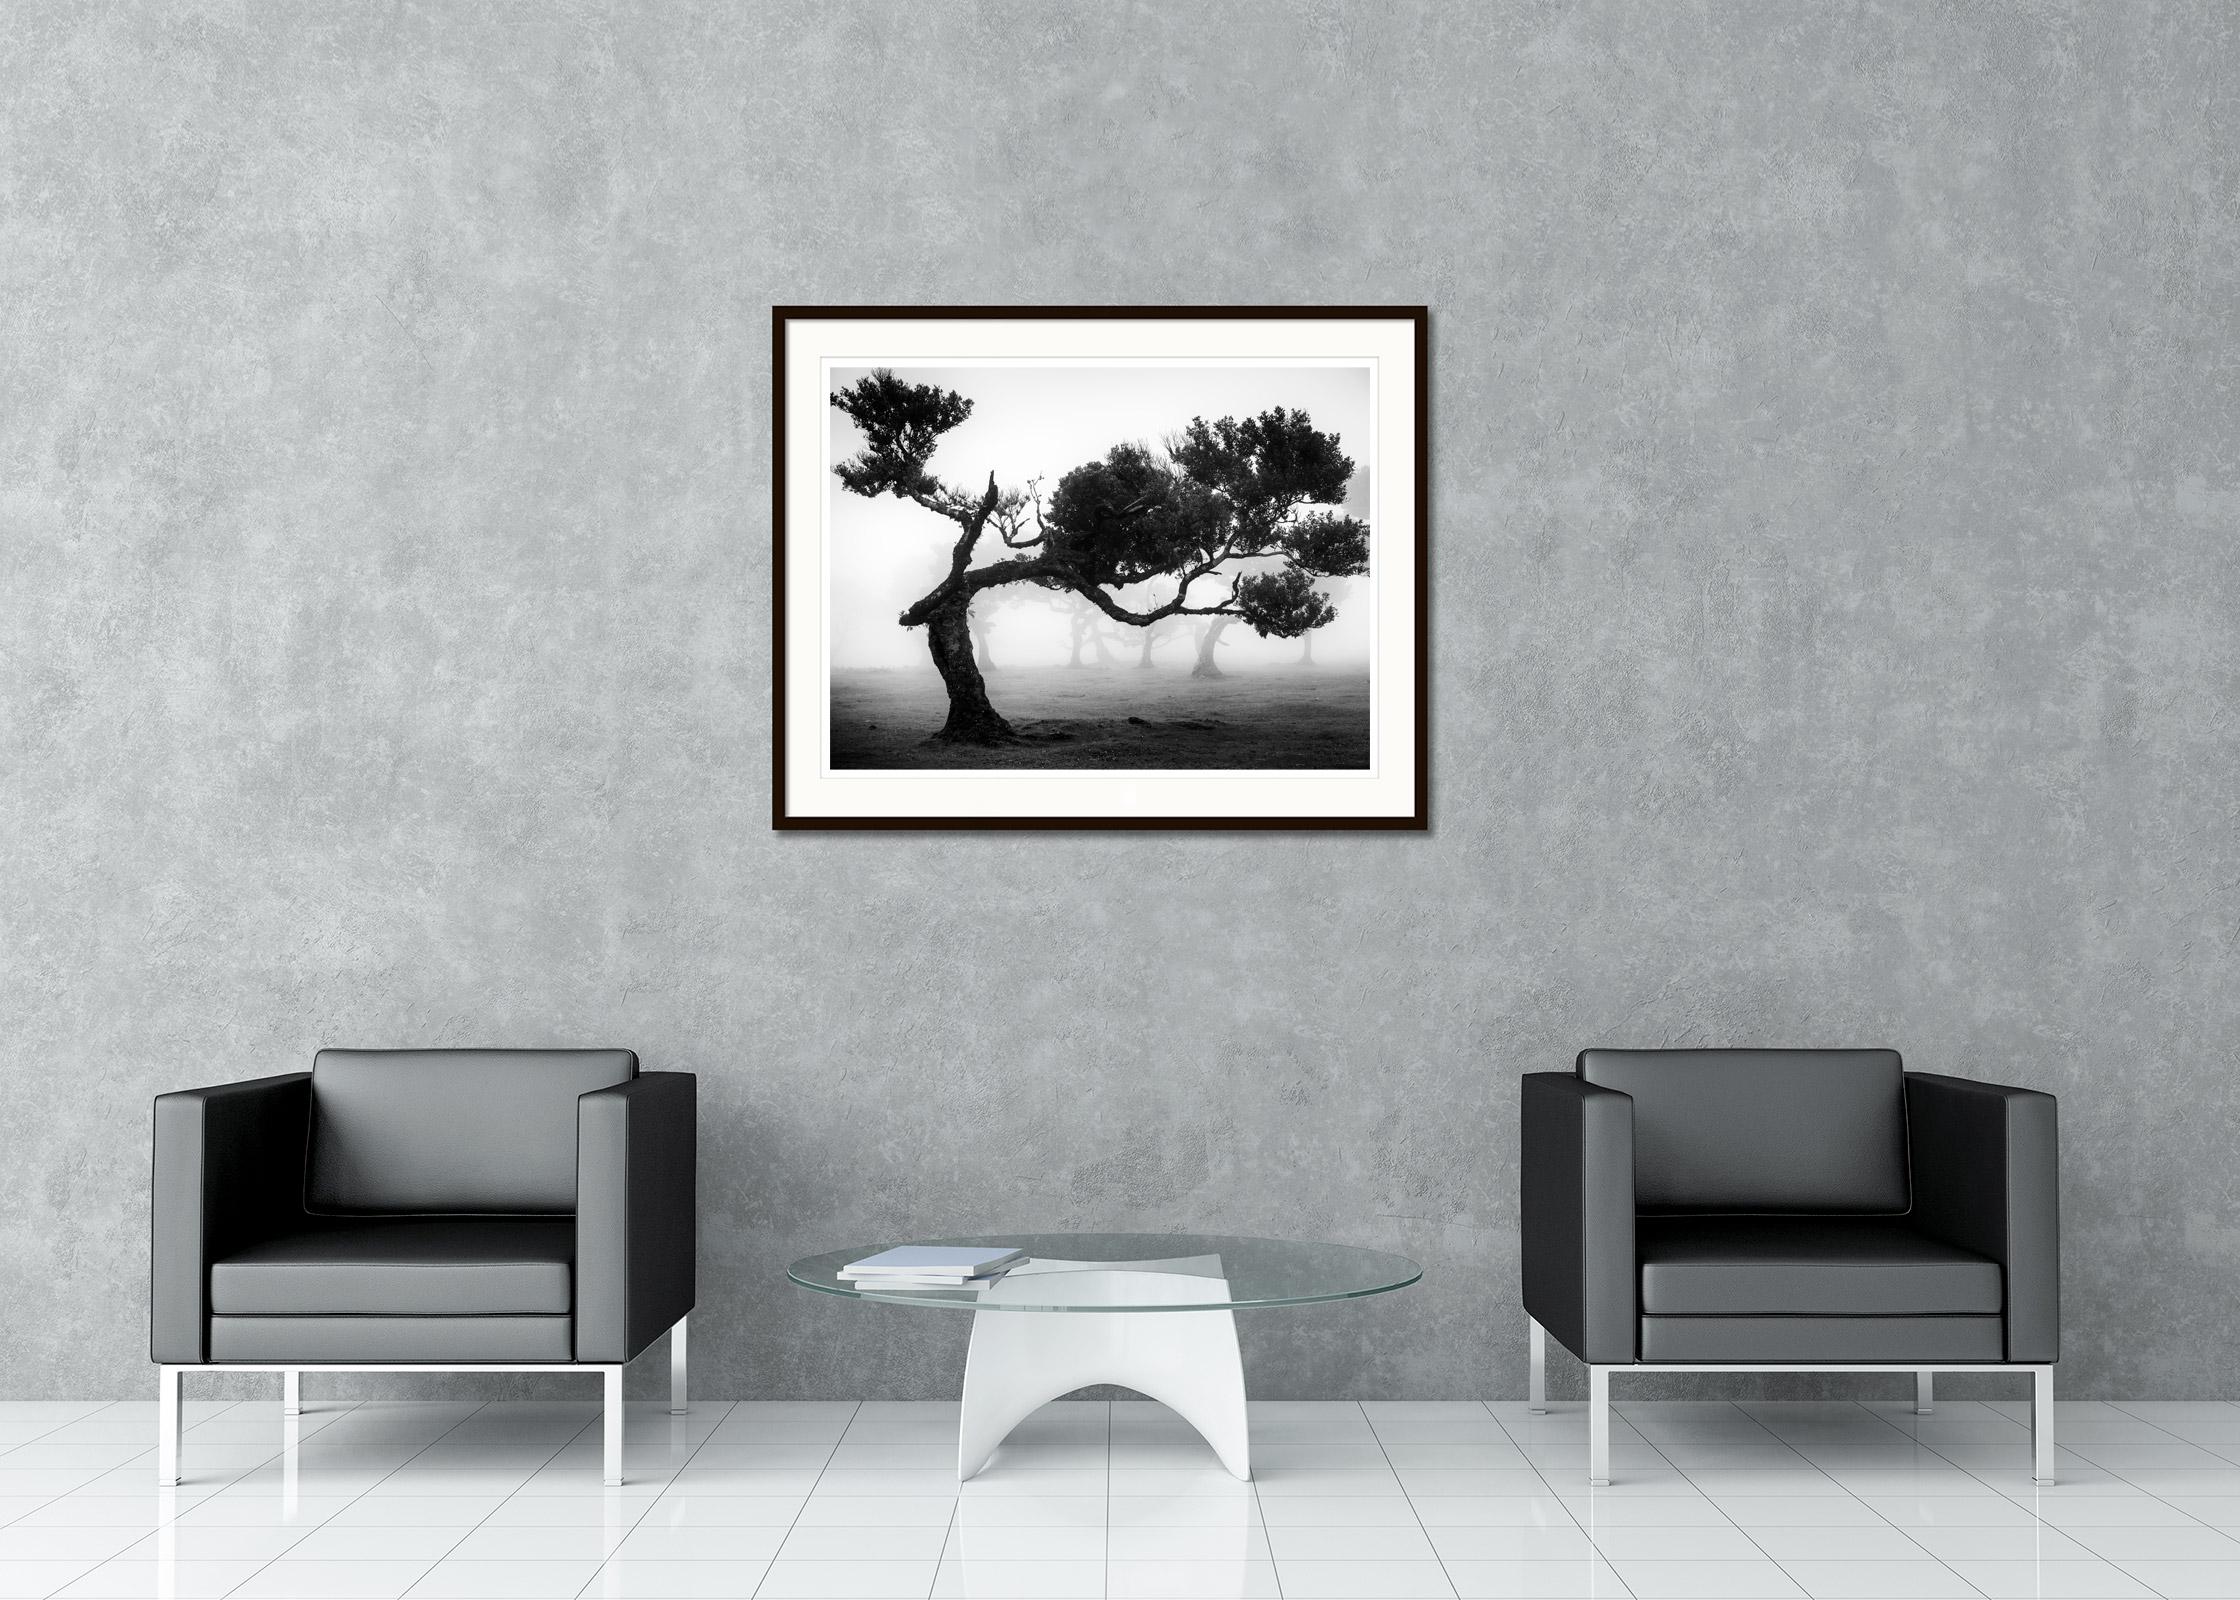 Black and white fine art landscape photography. Crooked tree in fairy forest in foggy mood, Fanal, Portugal. Archival pigment ink print as part of a limited edition of 5. All Gerald Berghammer prints are made to order in limited editions on